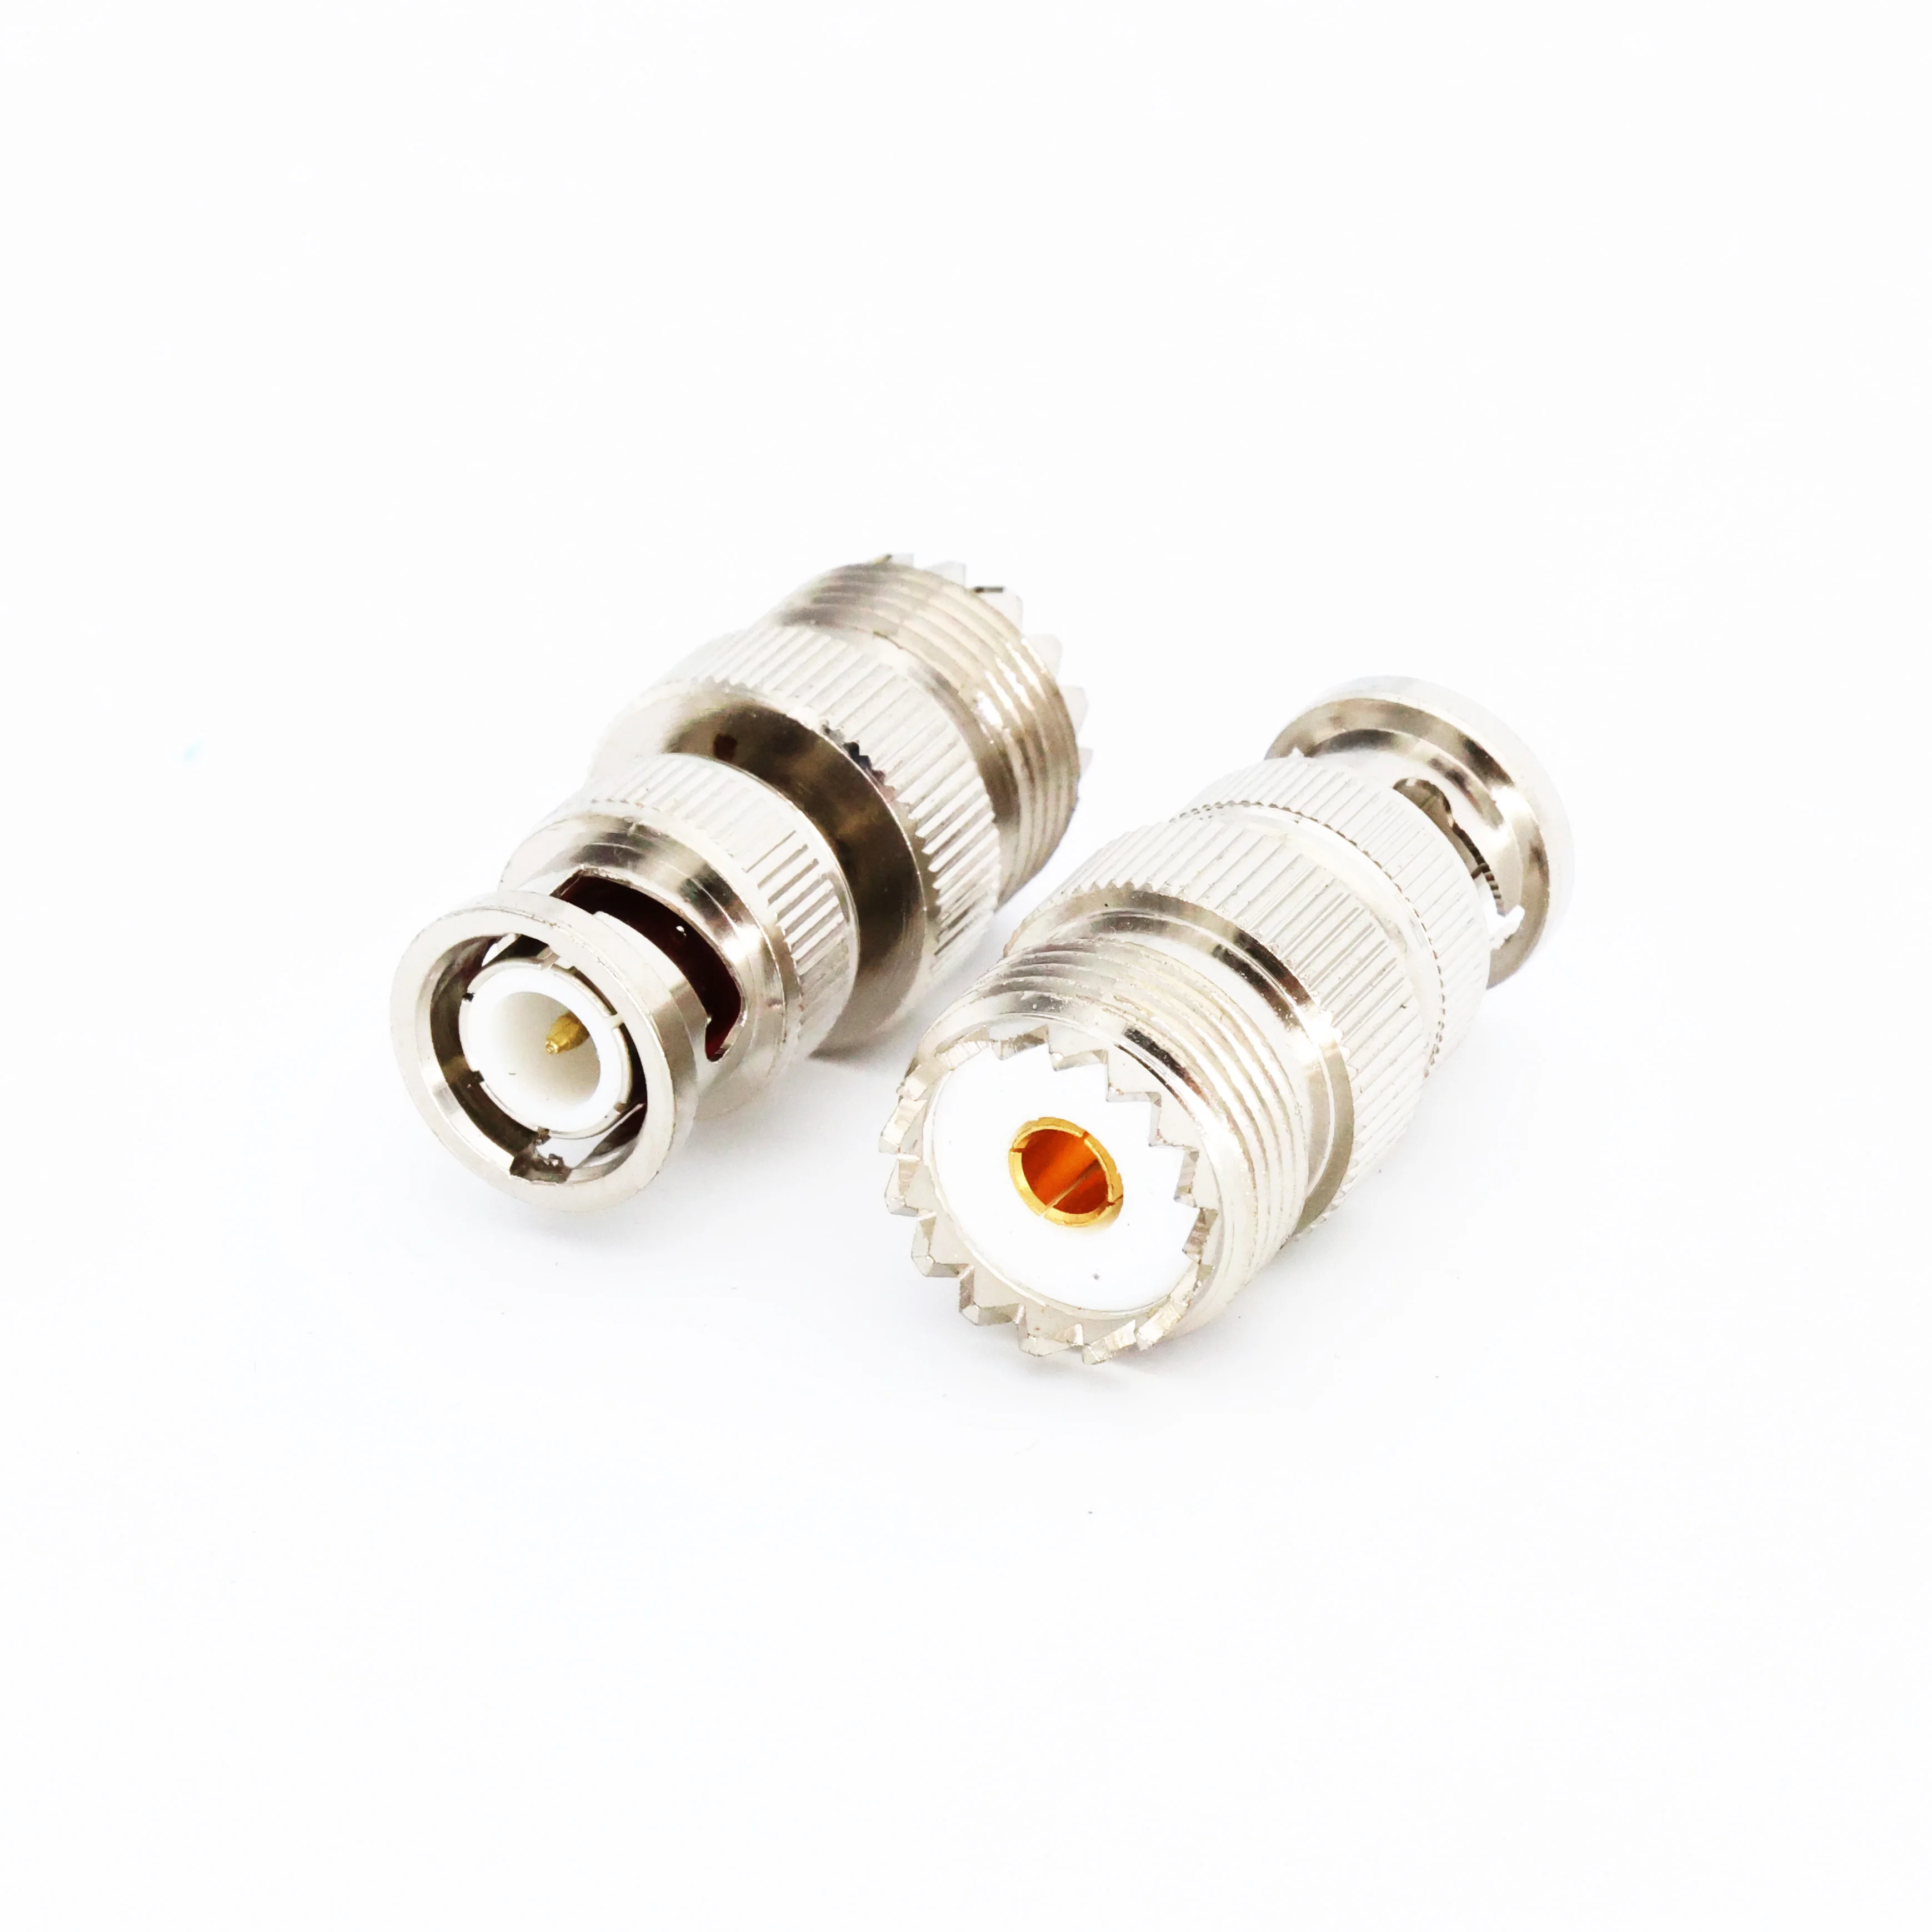 2pcs Cleqee BNC Male to UHF SO239 PL-259 Female RF Coaxial Adapter BNC to UHF Coax Jack Connector 3 6 9m extension cables sma male to female coaxial extension cable wifi router antenna aerial copper plated gold cable